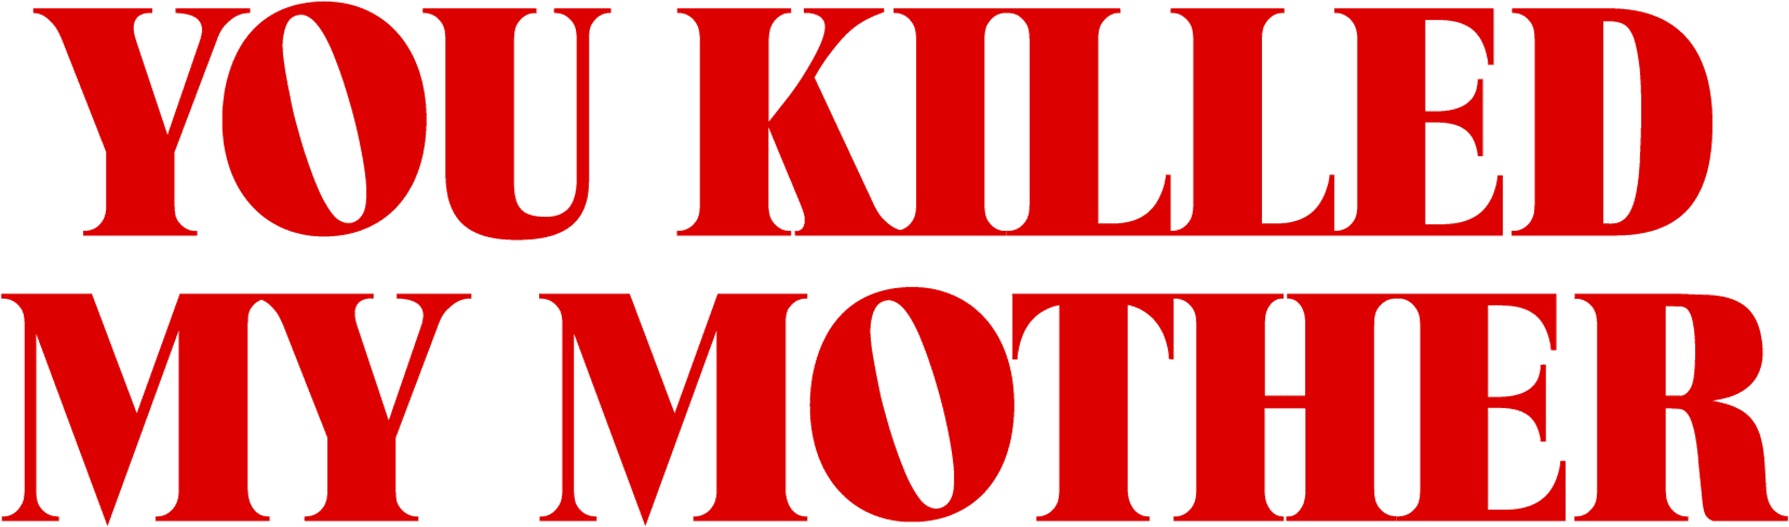 You Killed My Mother logo